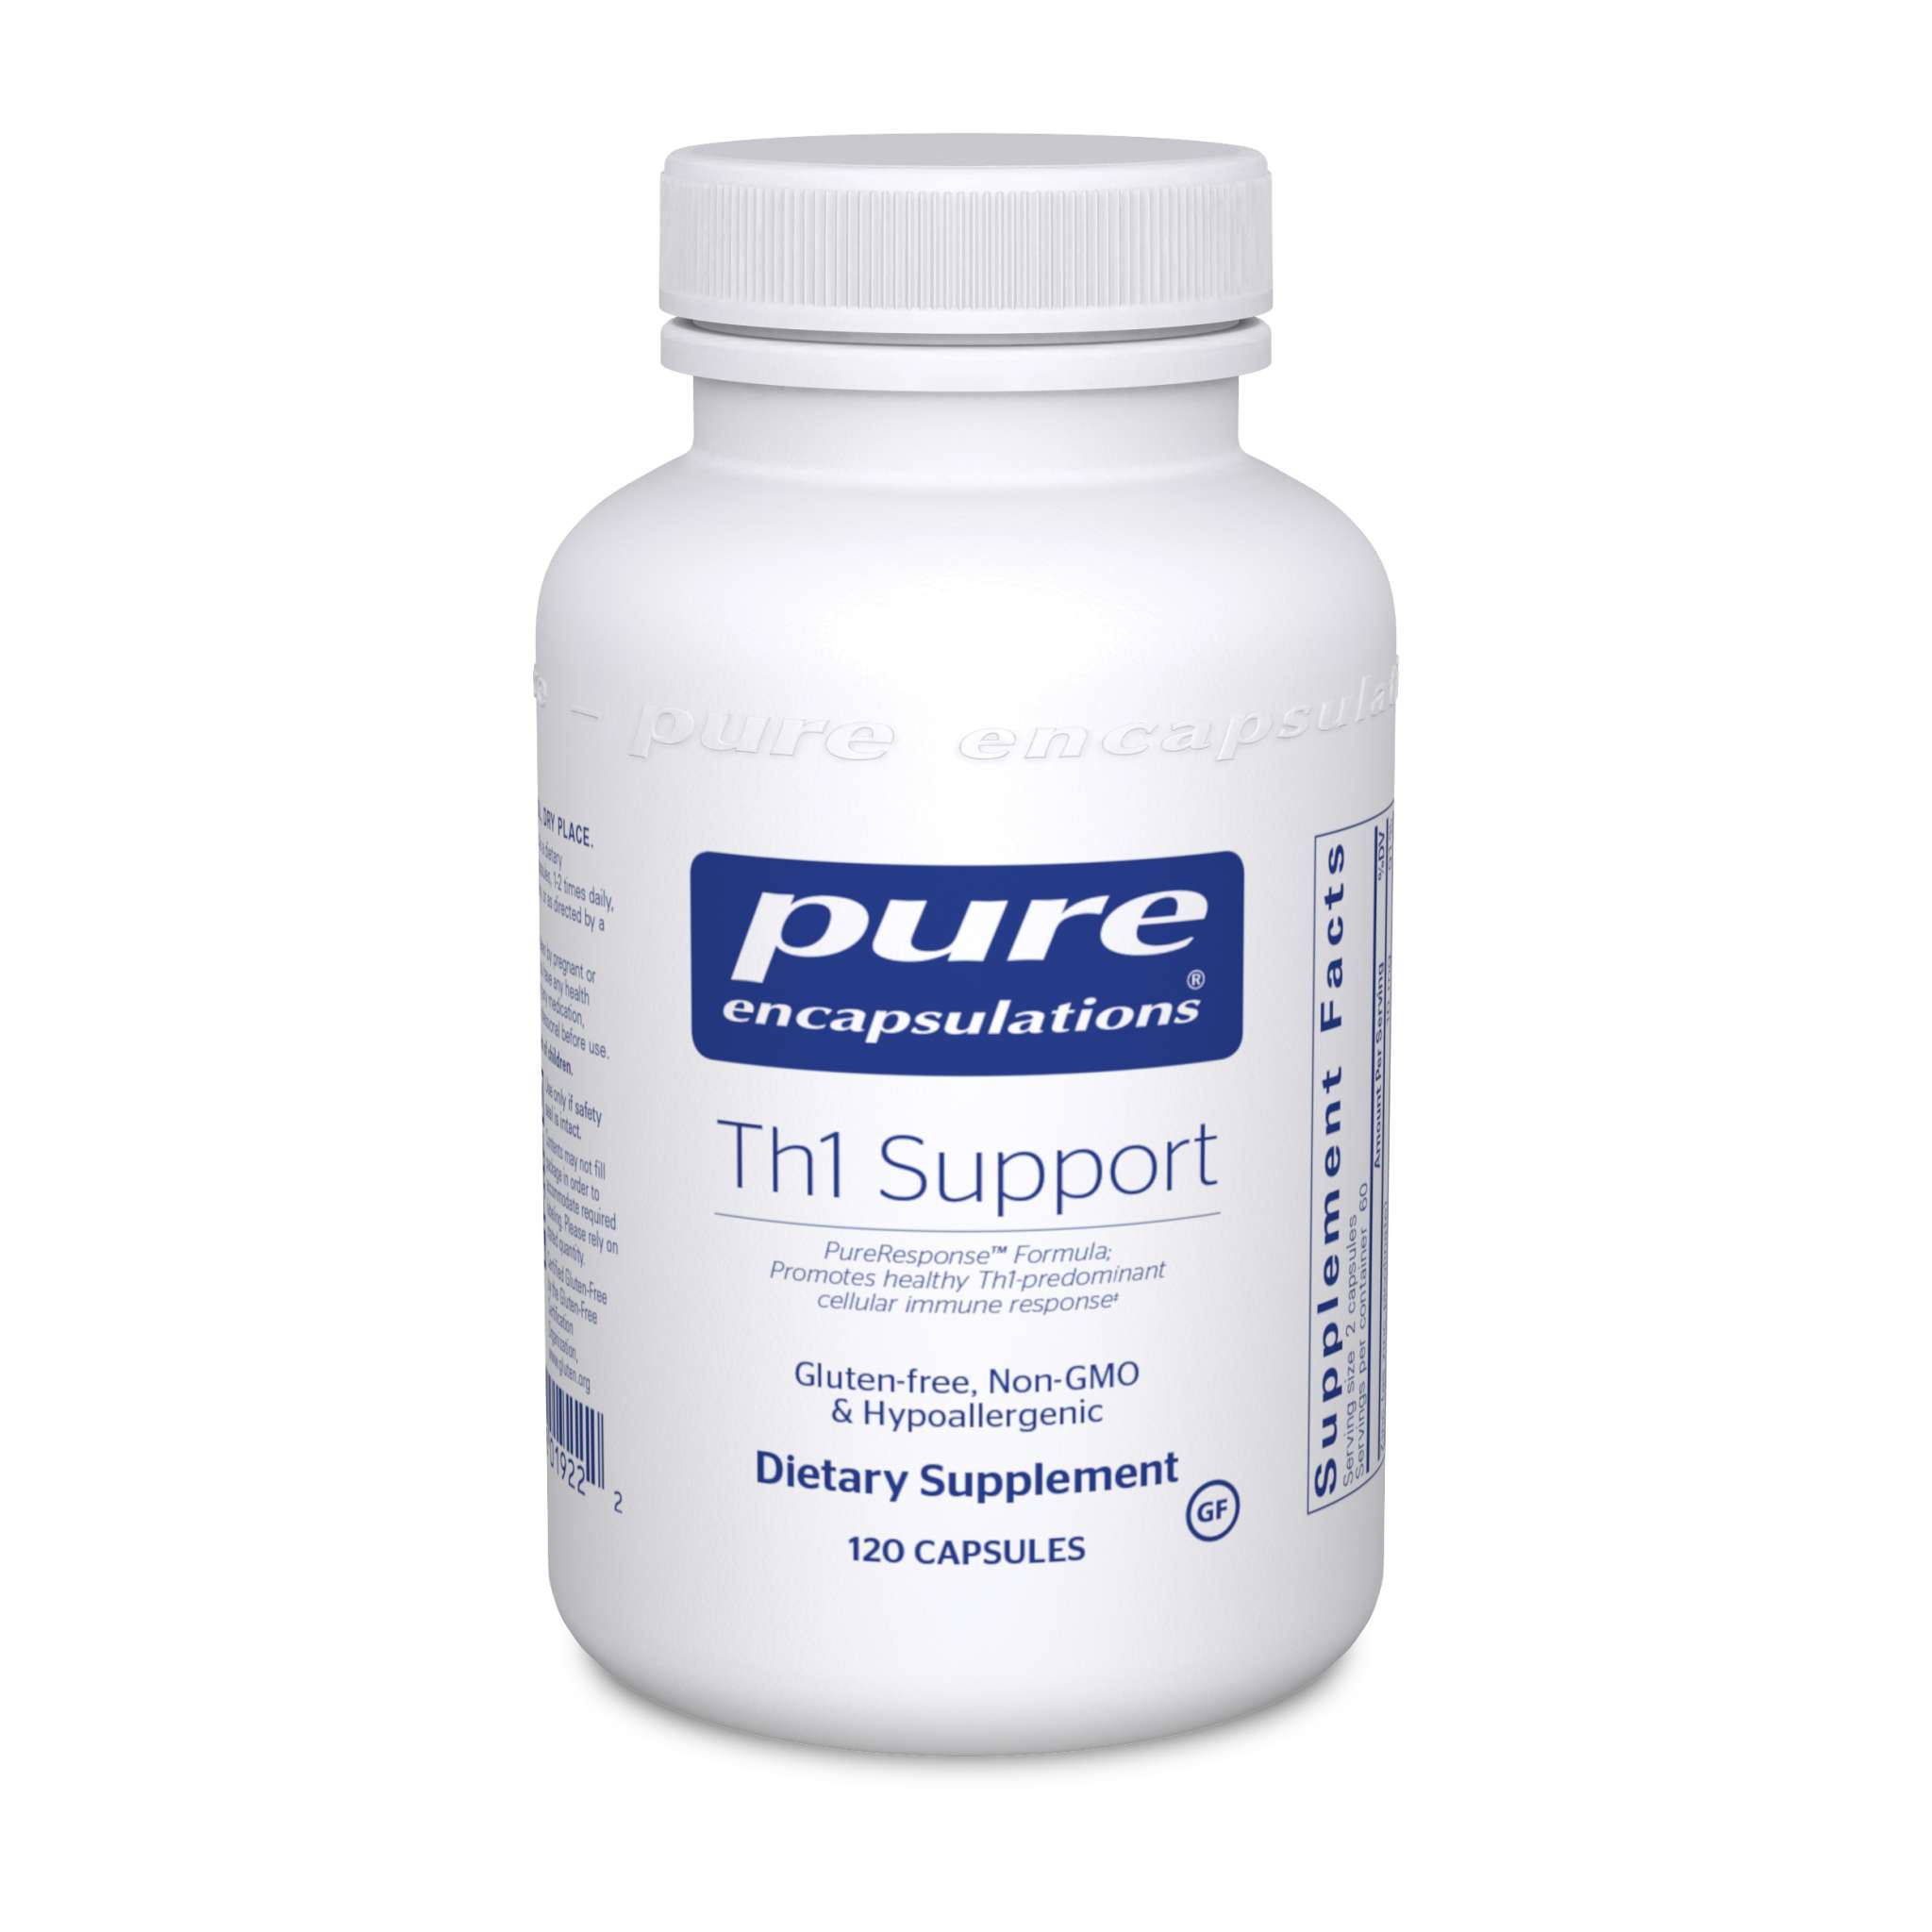 Pure Encapsulations - Th1 Support